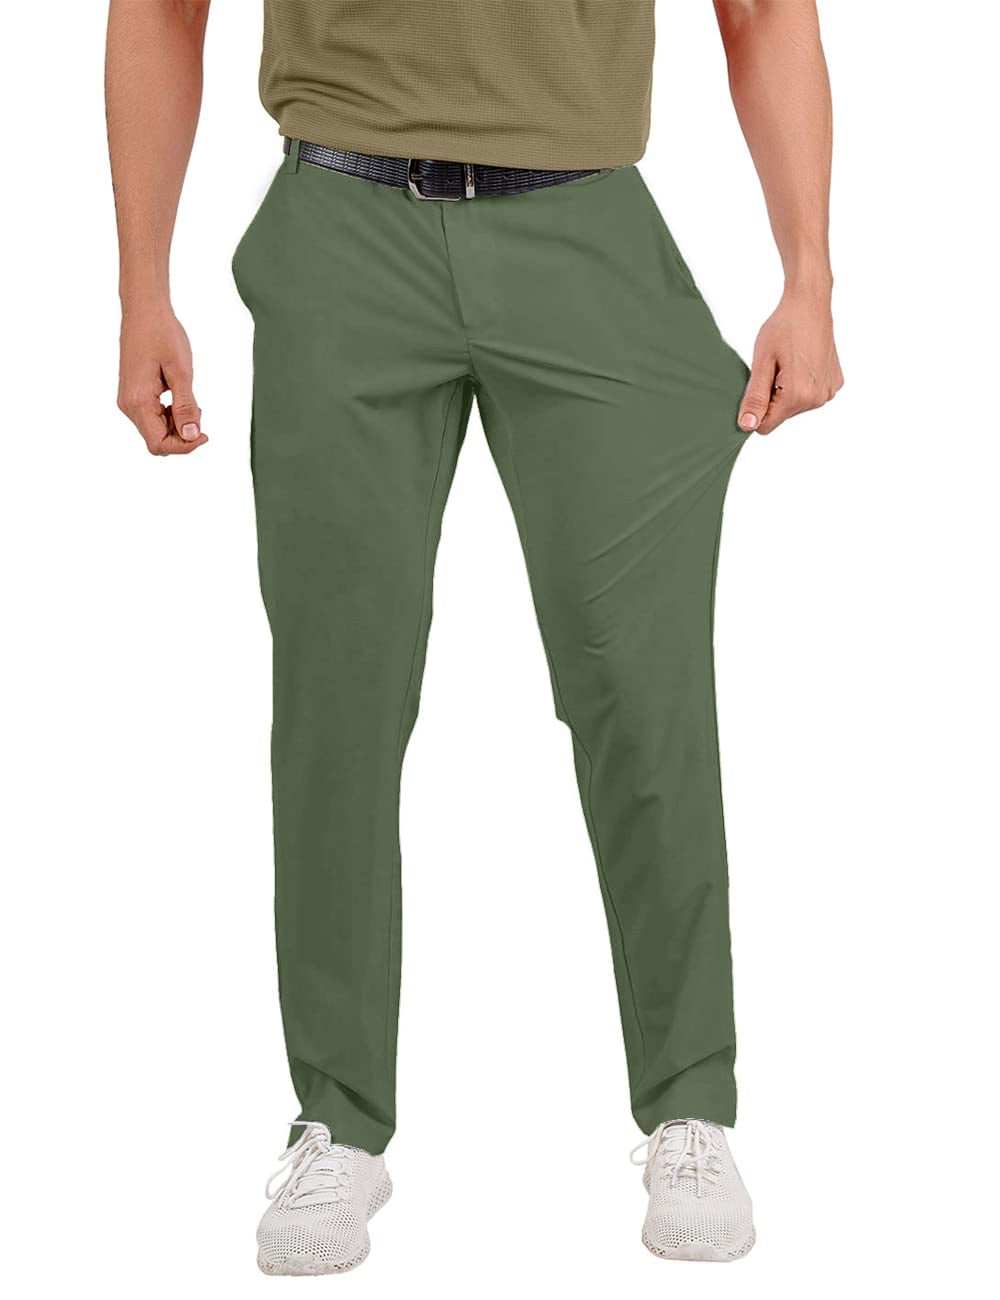 Inadays Men's Pants Stretch Golf Work Pant Workout Pants Mens Hiking ...